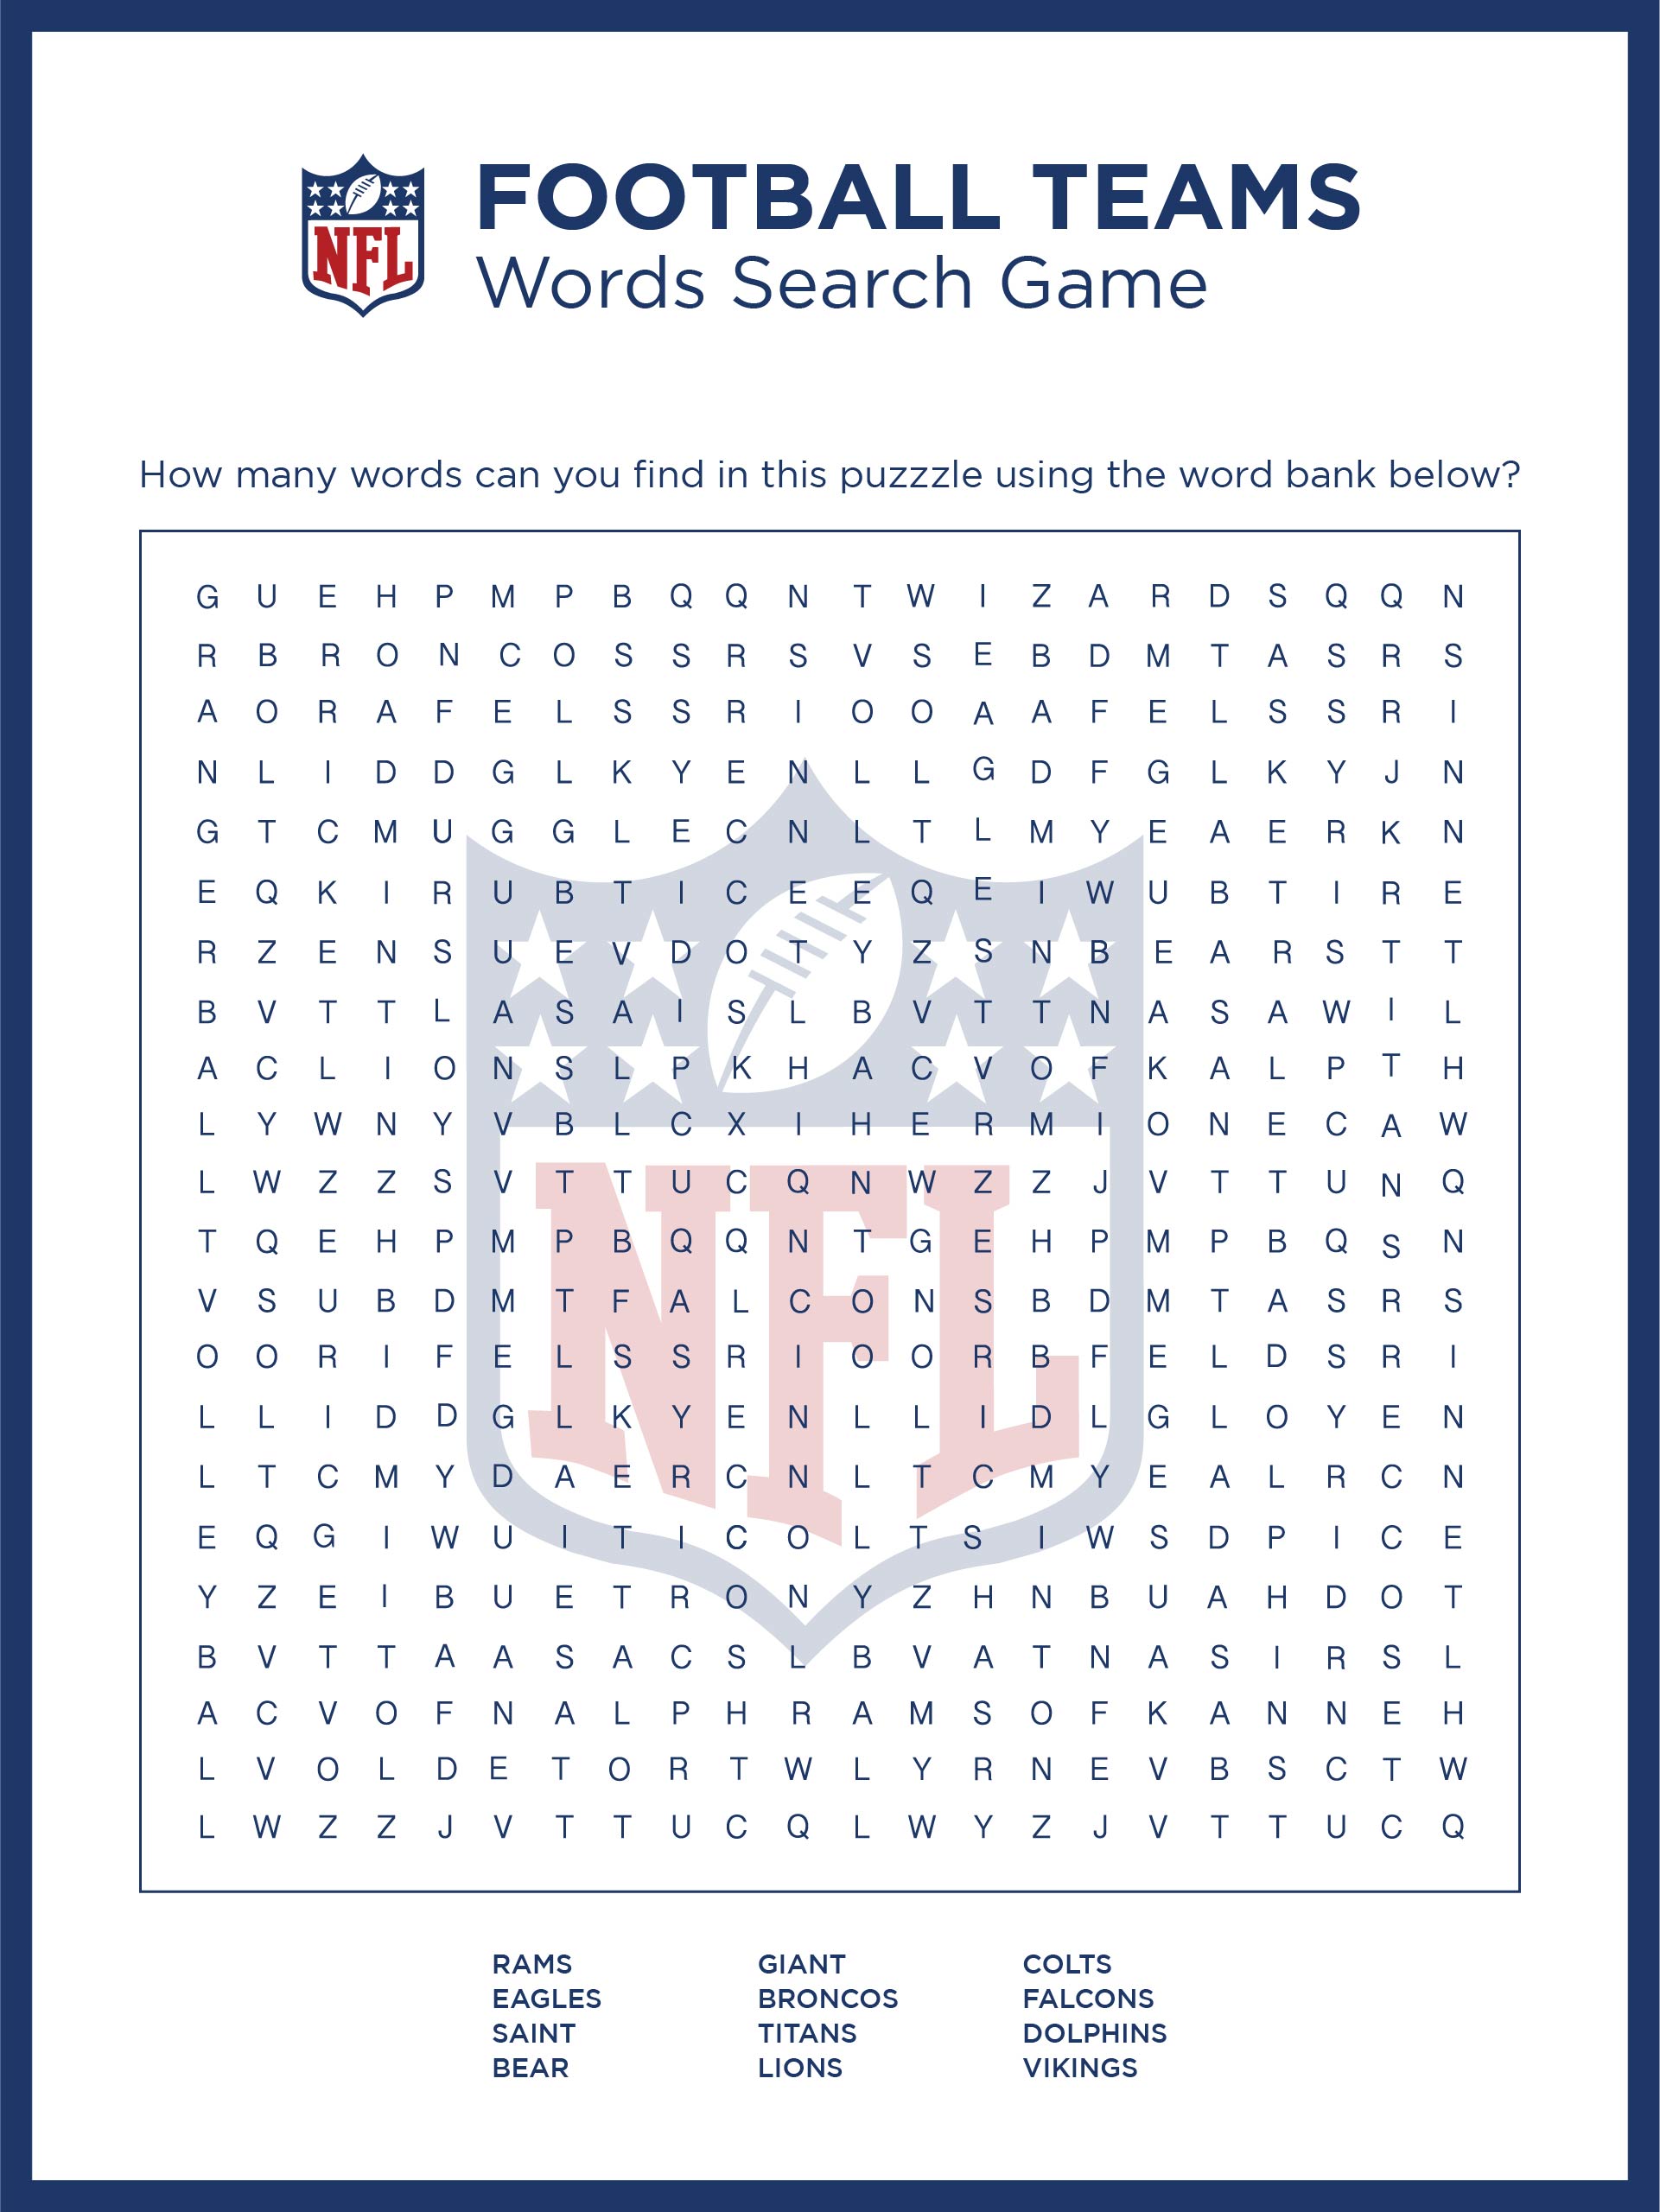 6 Best Images of NFL Football Word Search Printable - NFL Word Search ...